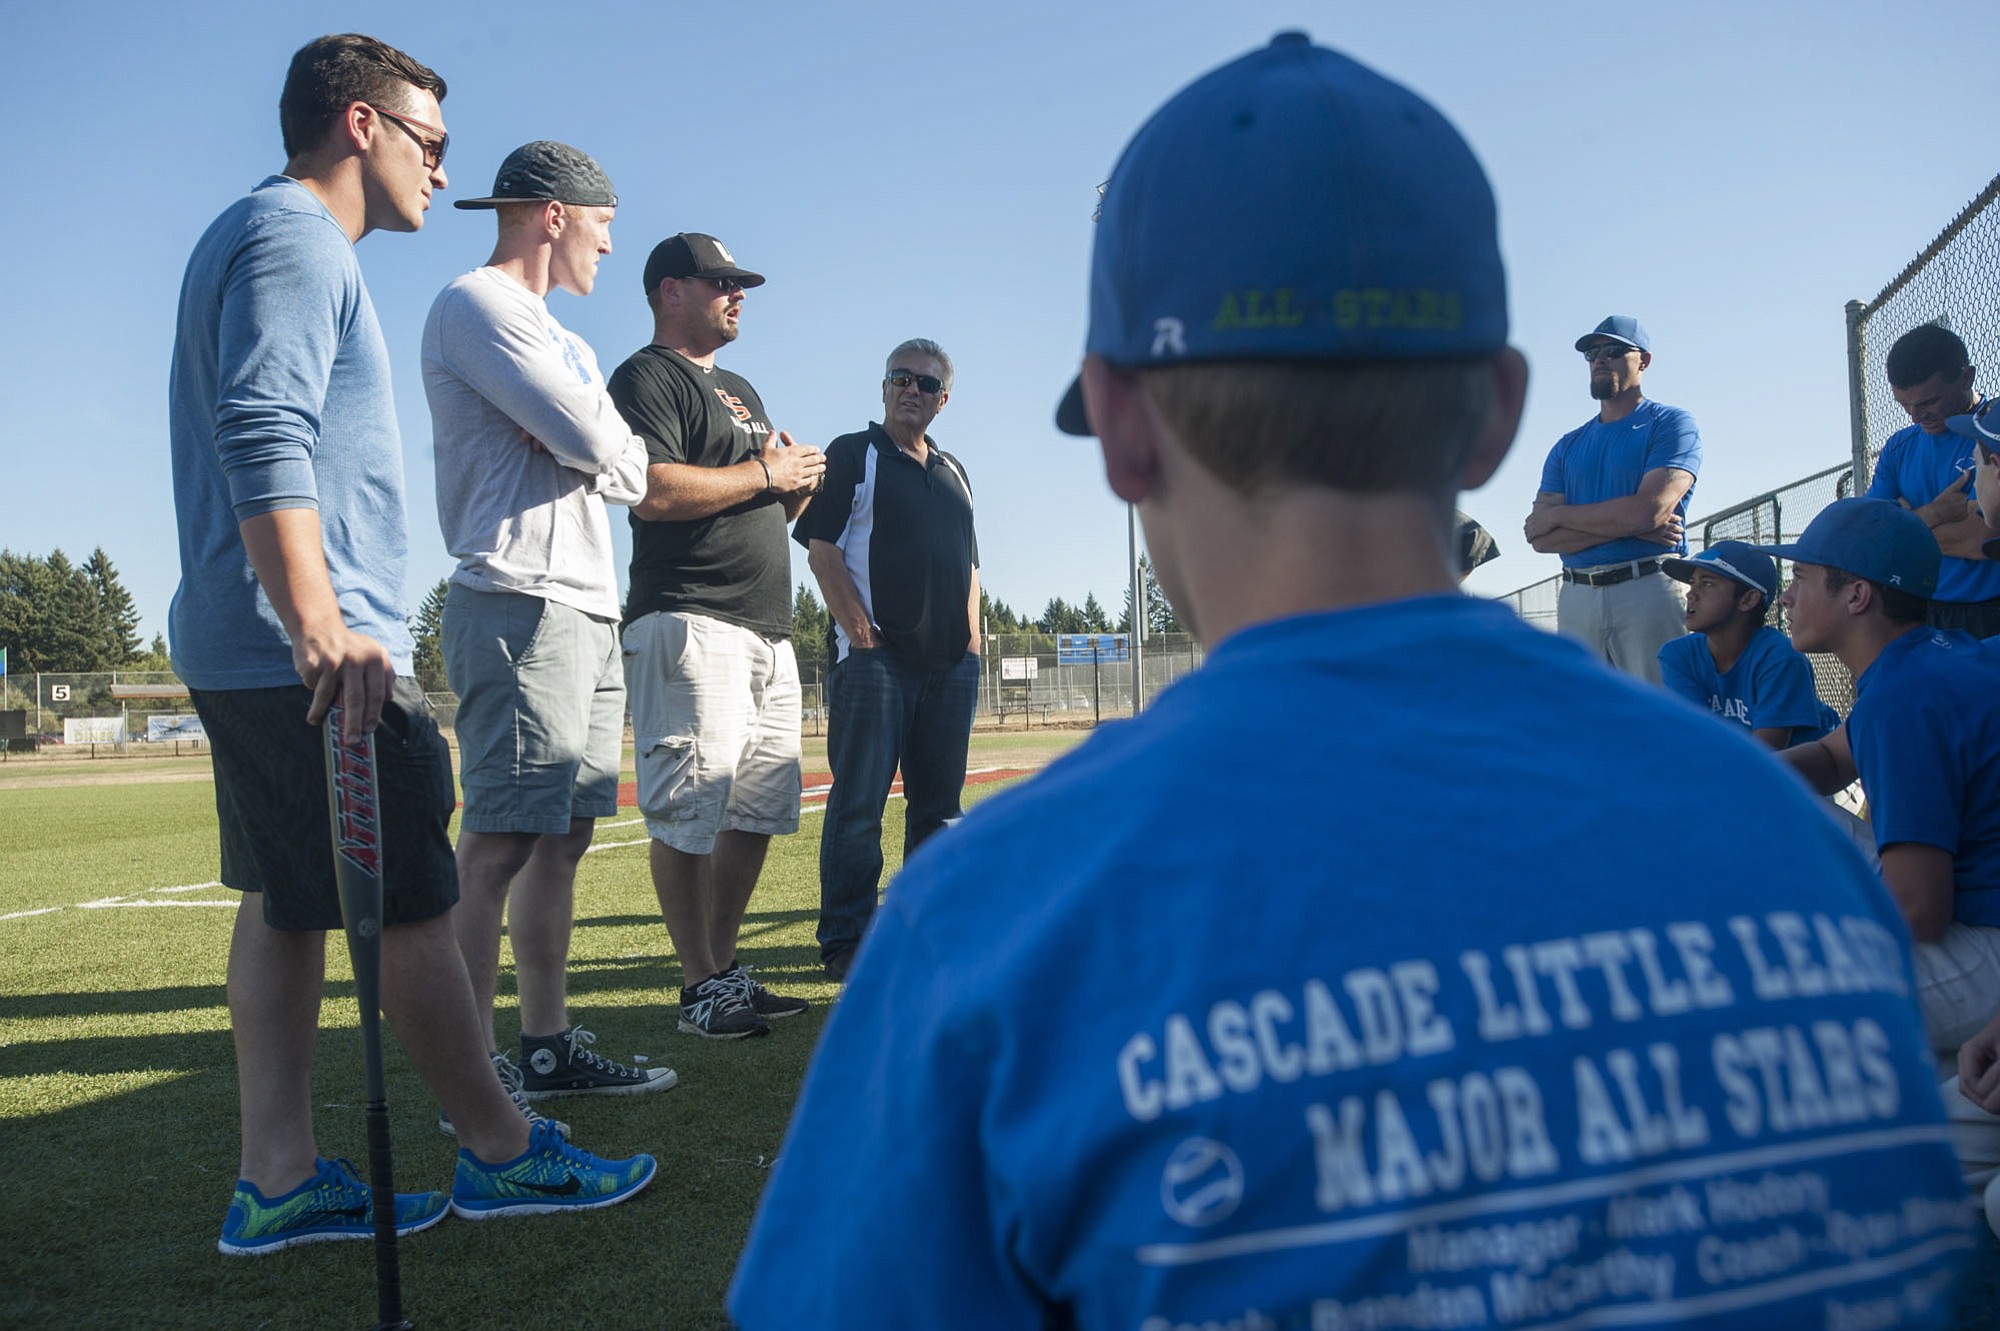 From left, former Hazel Dell Little League baseball players Jay Ponciano, Jackson Evans, Union High School coach Ben McGrew and former Hazel Dell coach Jim Ponciano give the Cascade Little League players advice prior to practice in Vancouver on Tuesday August 4, 2015.